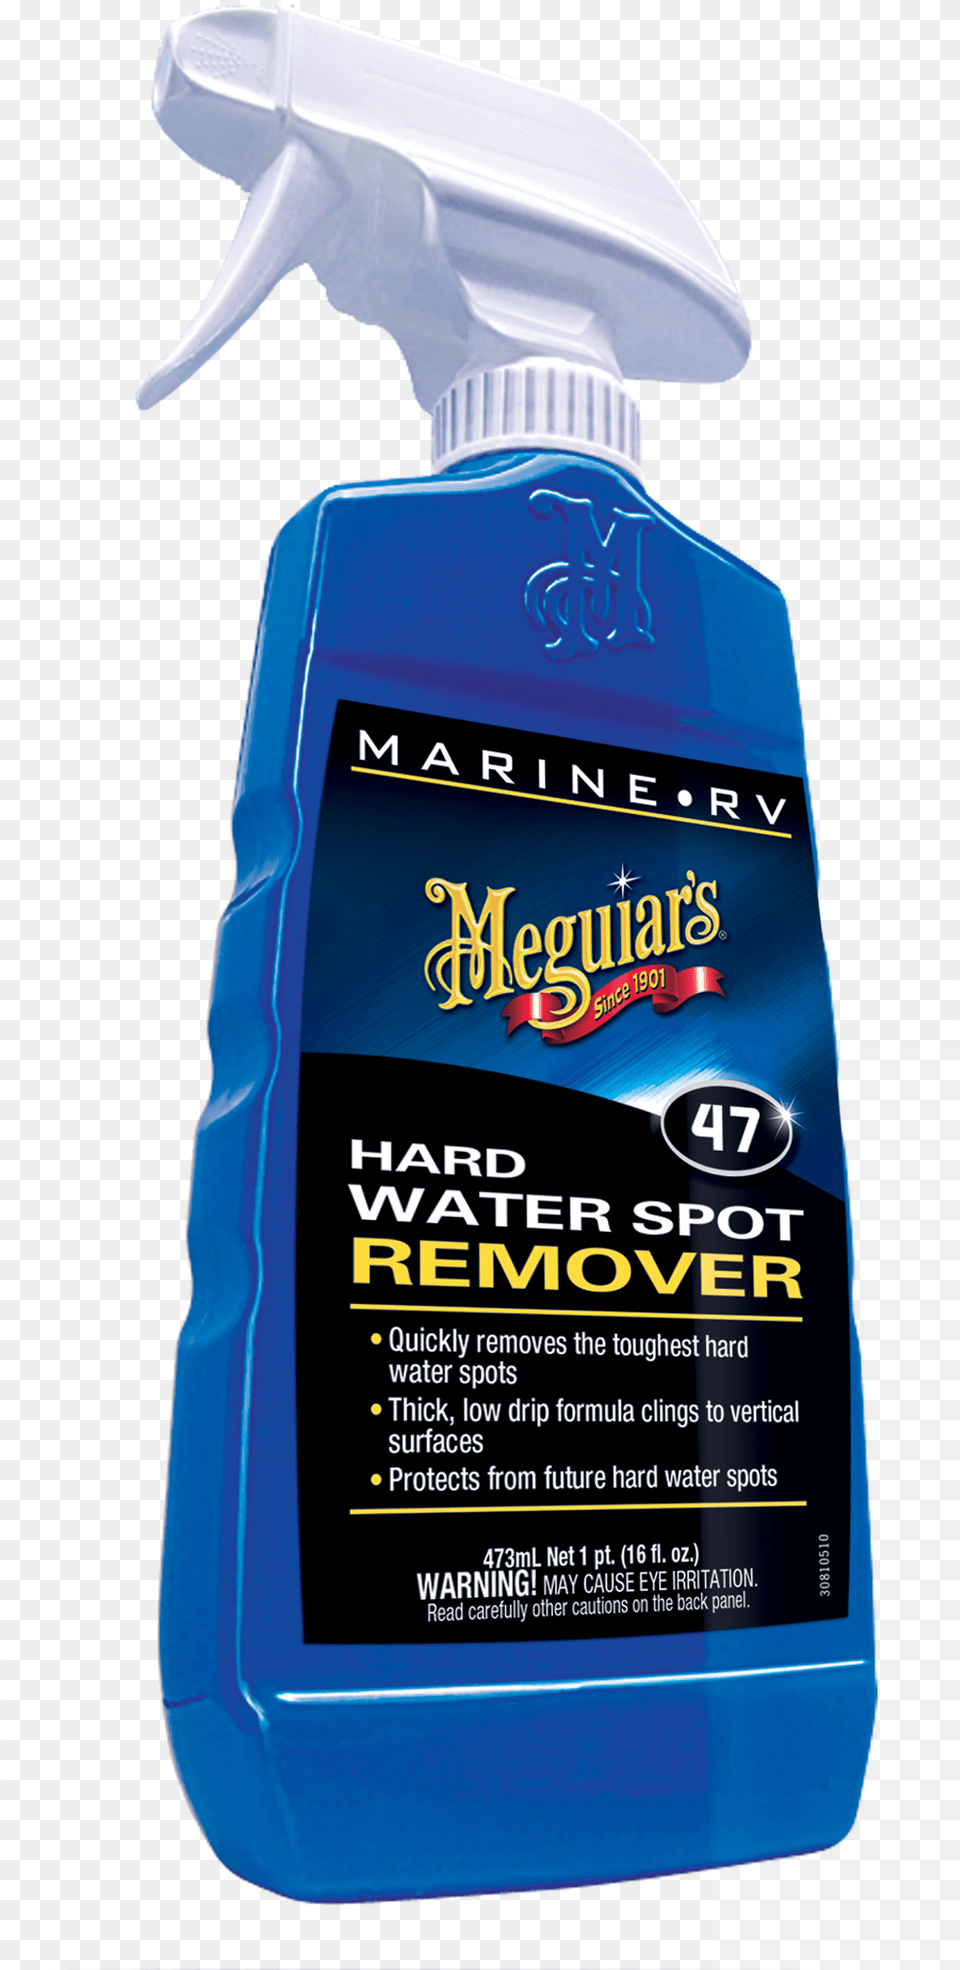 Hard Water Spot Remover Vinyl And Rubber Meguiars, Bottle, Cosmetics, Perfume, Cleaning Png